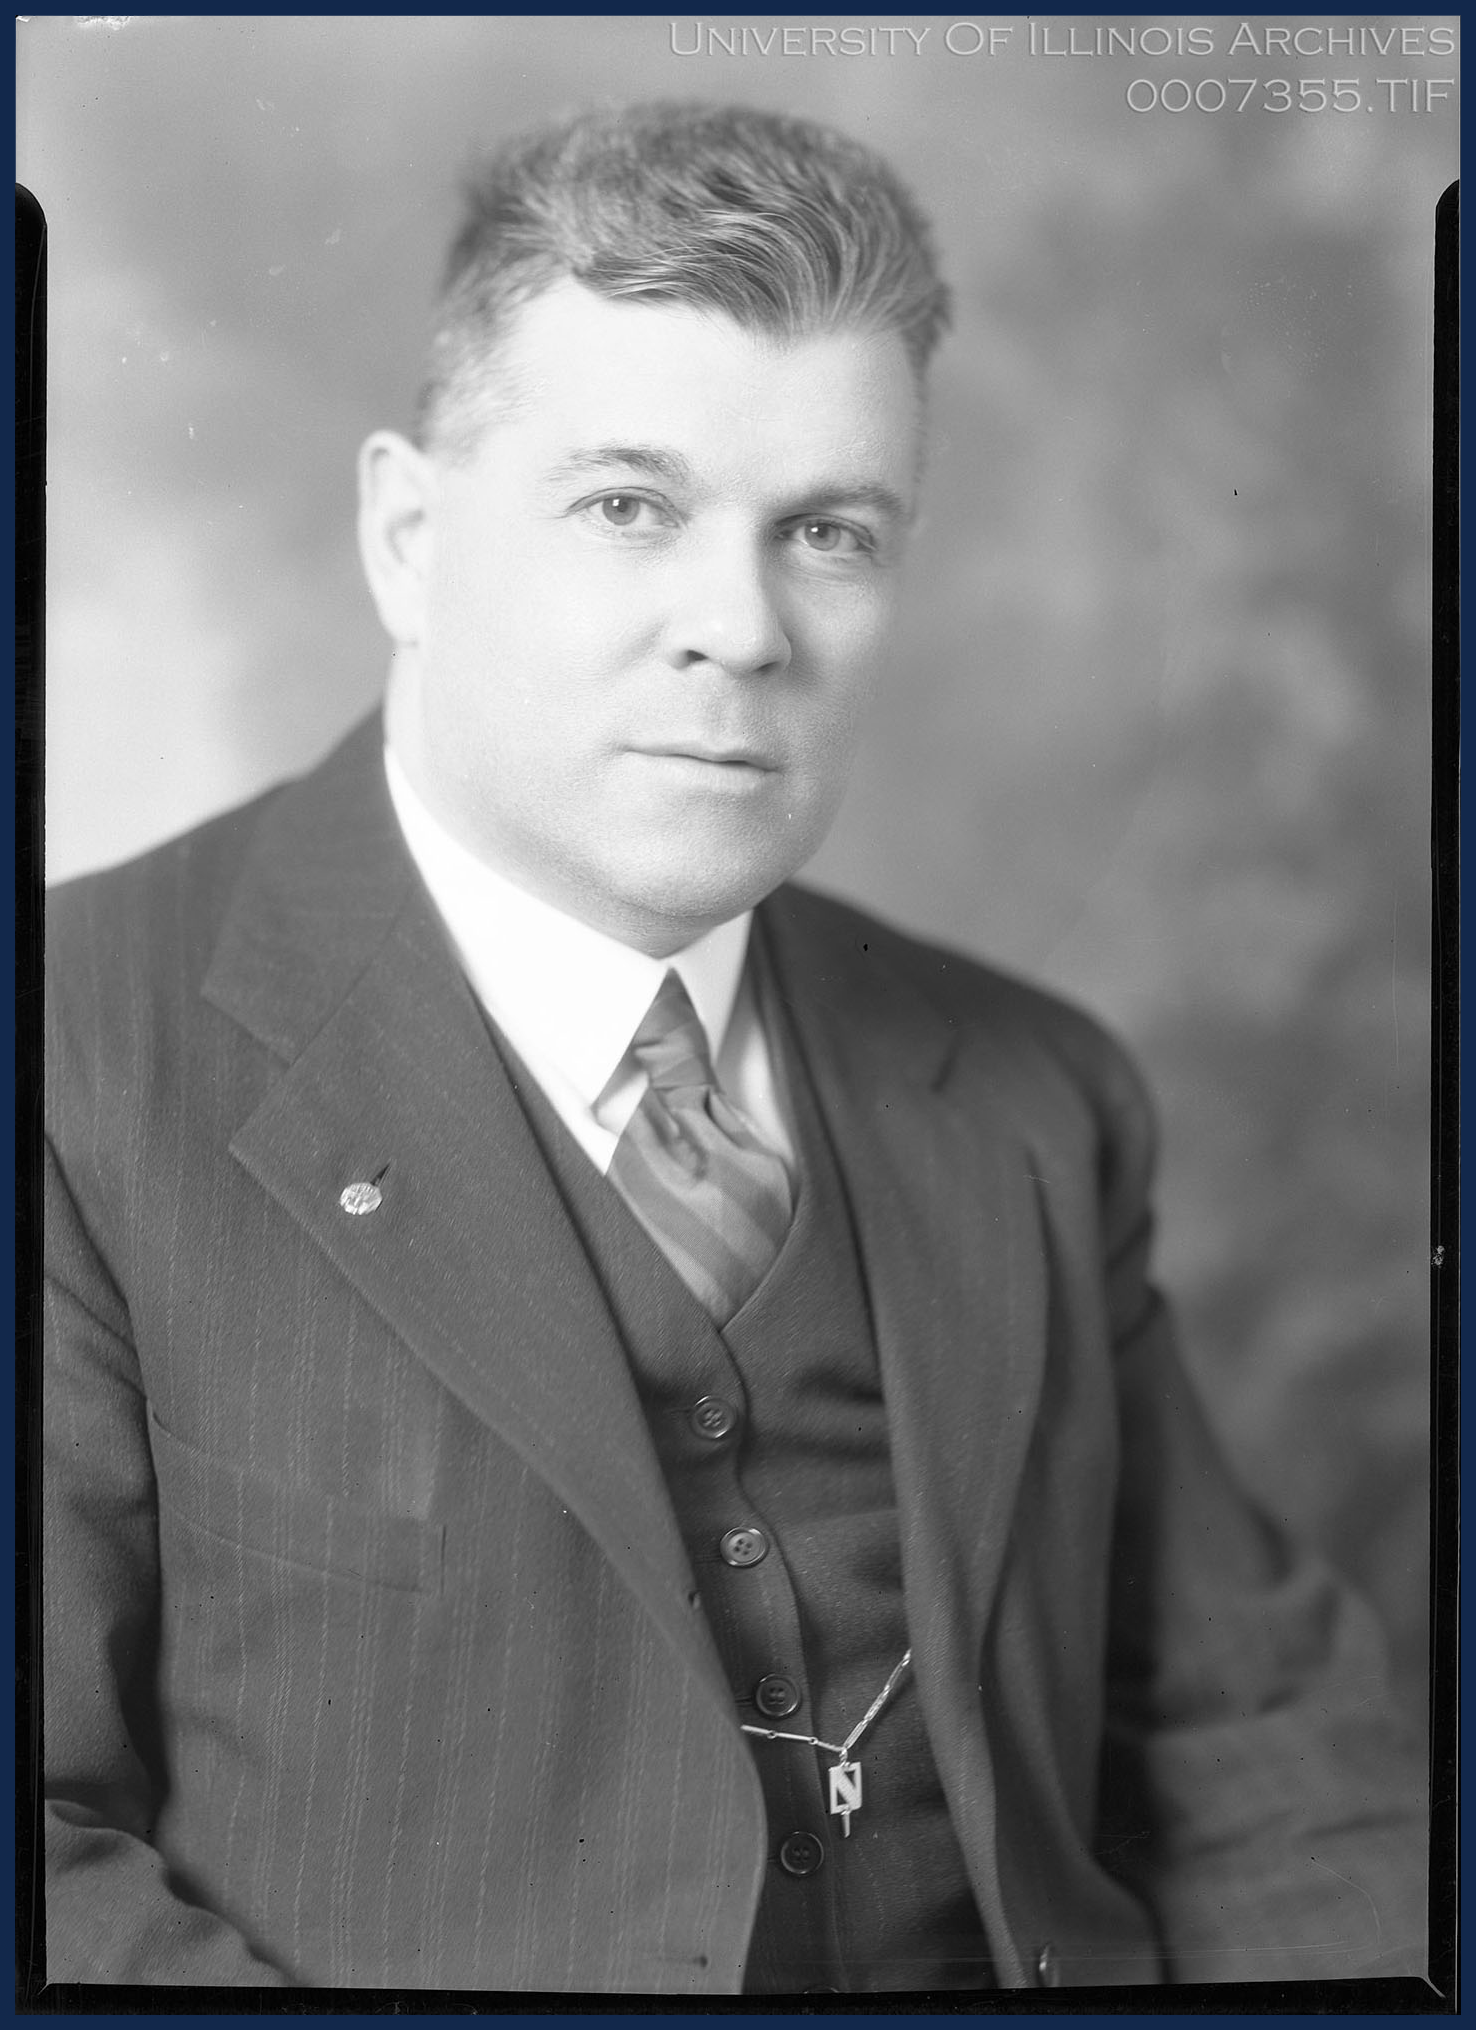 Picture of Paul D. Converse from University Archives